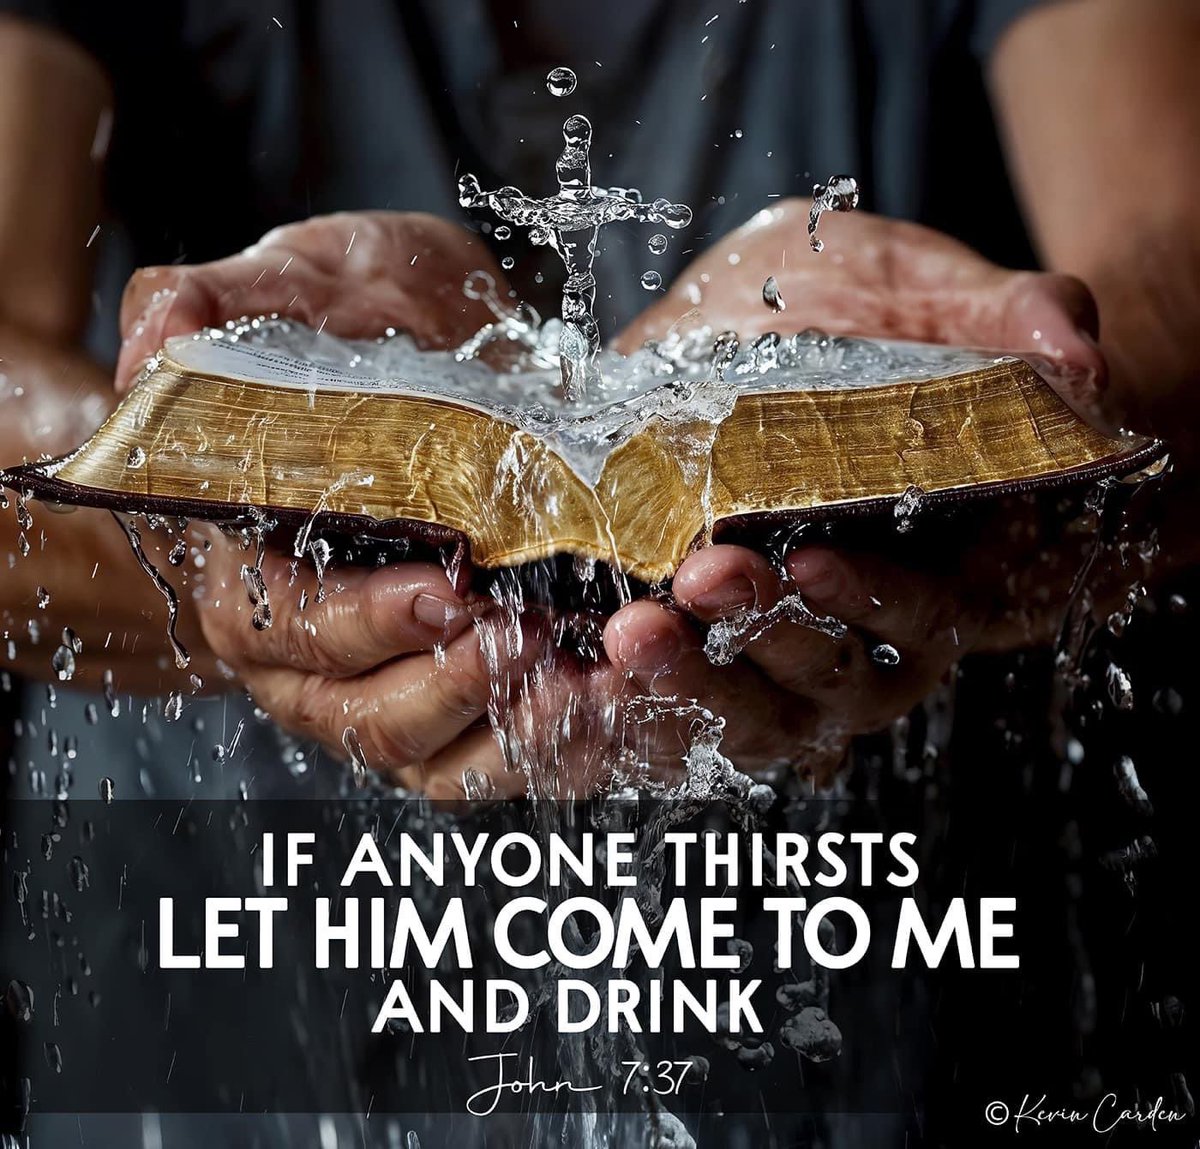 You may not realize that you are thirsty, but only Jesus can quench it. ❤️